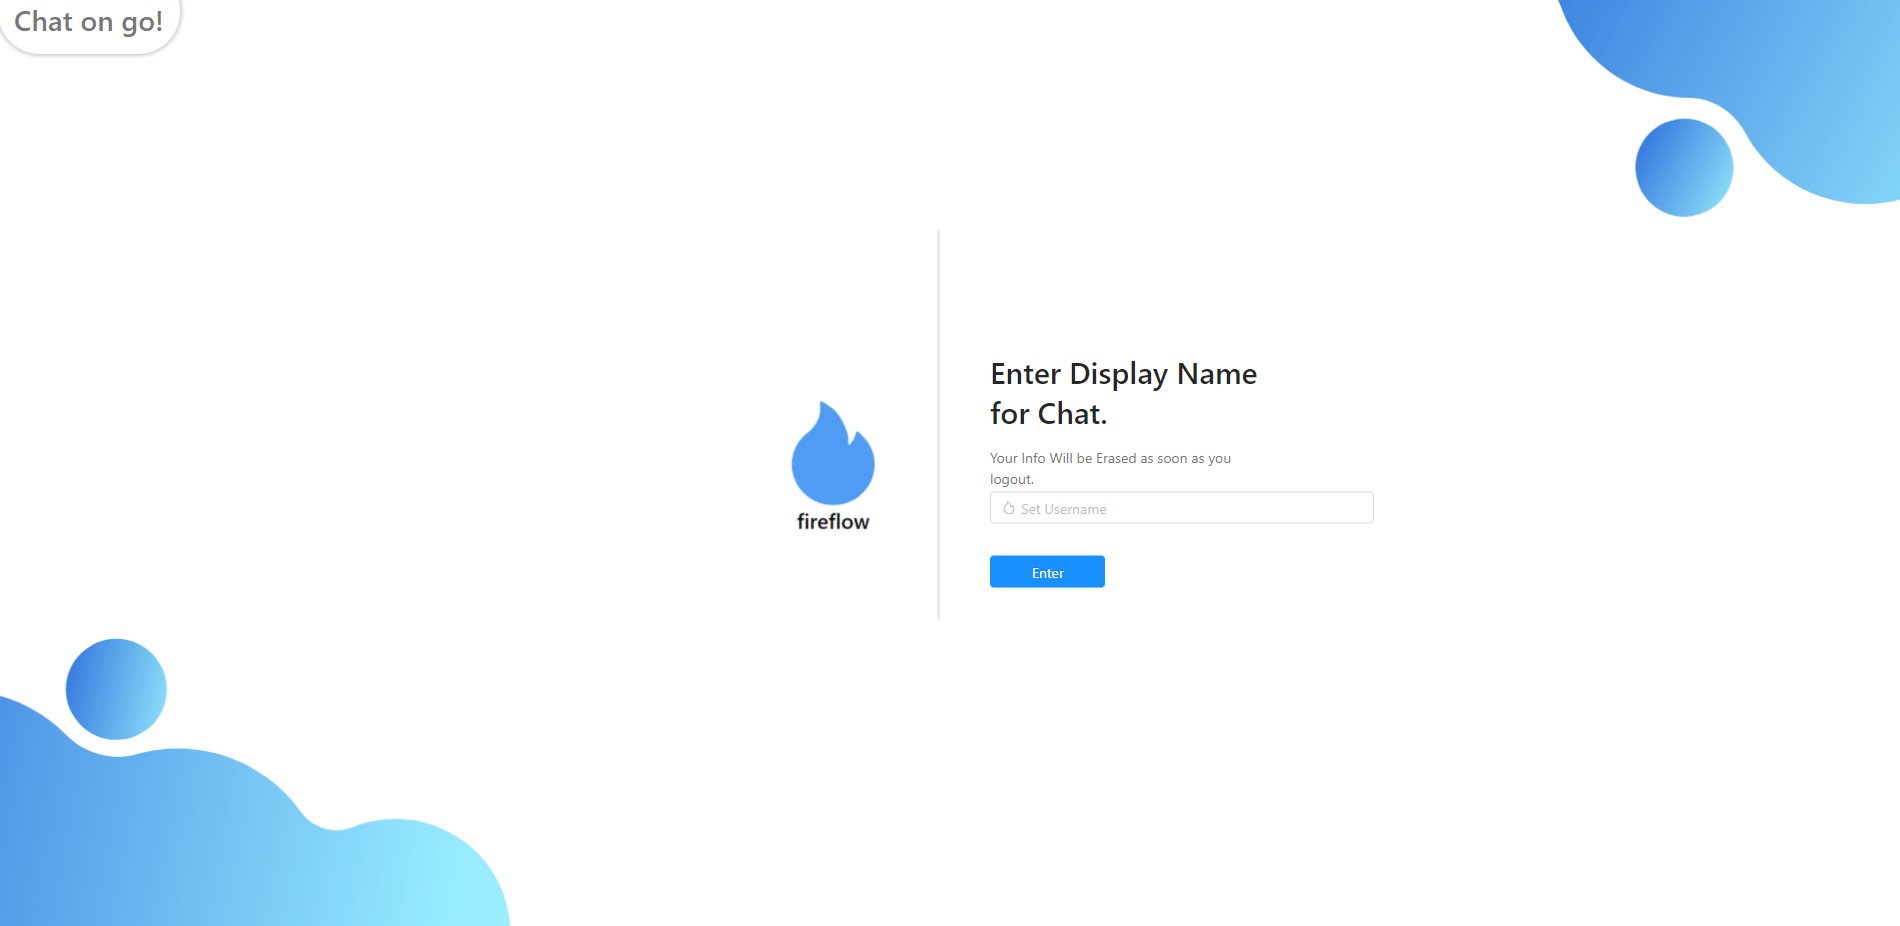 fireflow - Online Anonymous Chat Rooms